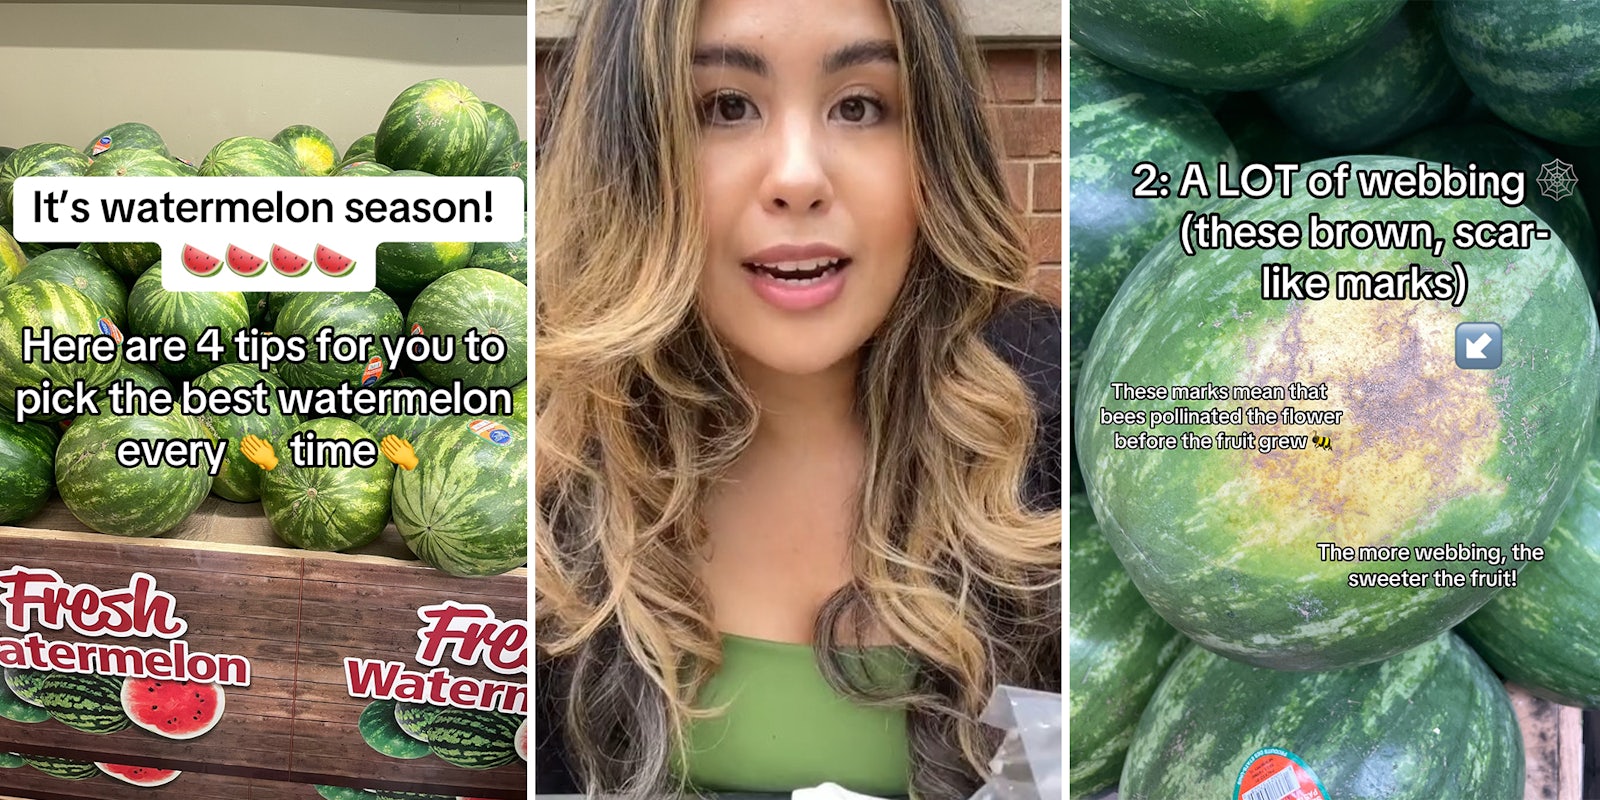 Grocery shopper shares 5 tips to picking the best watermelon